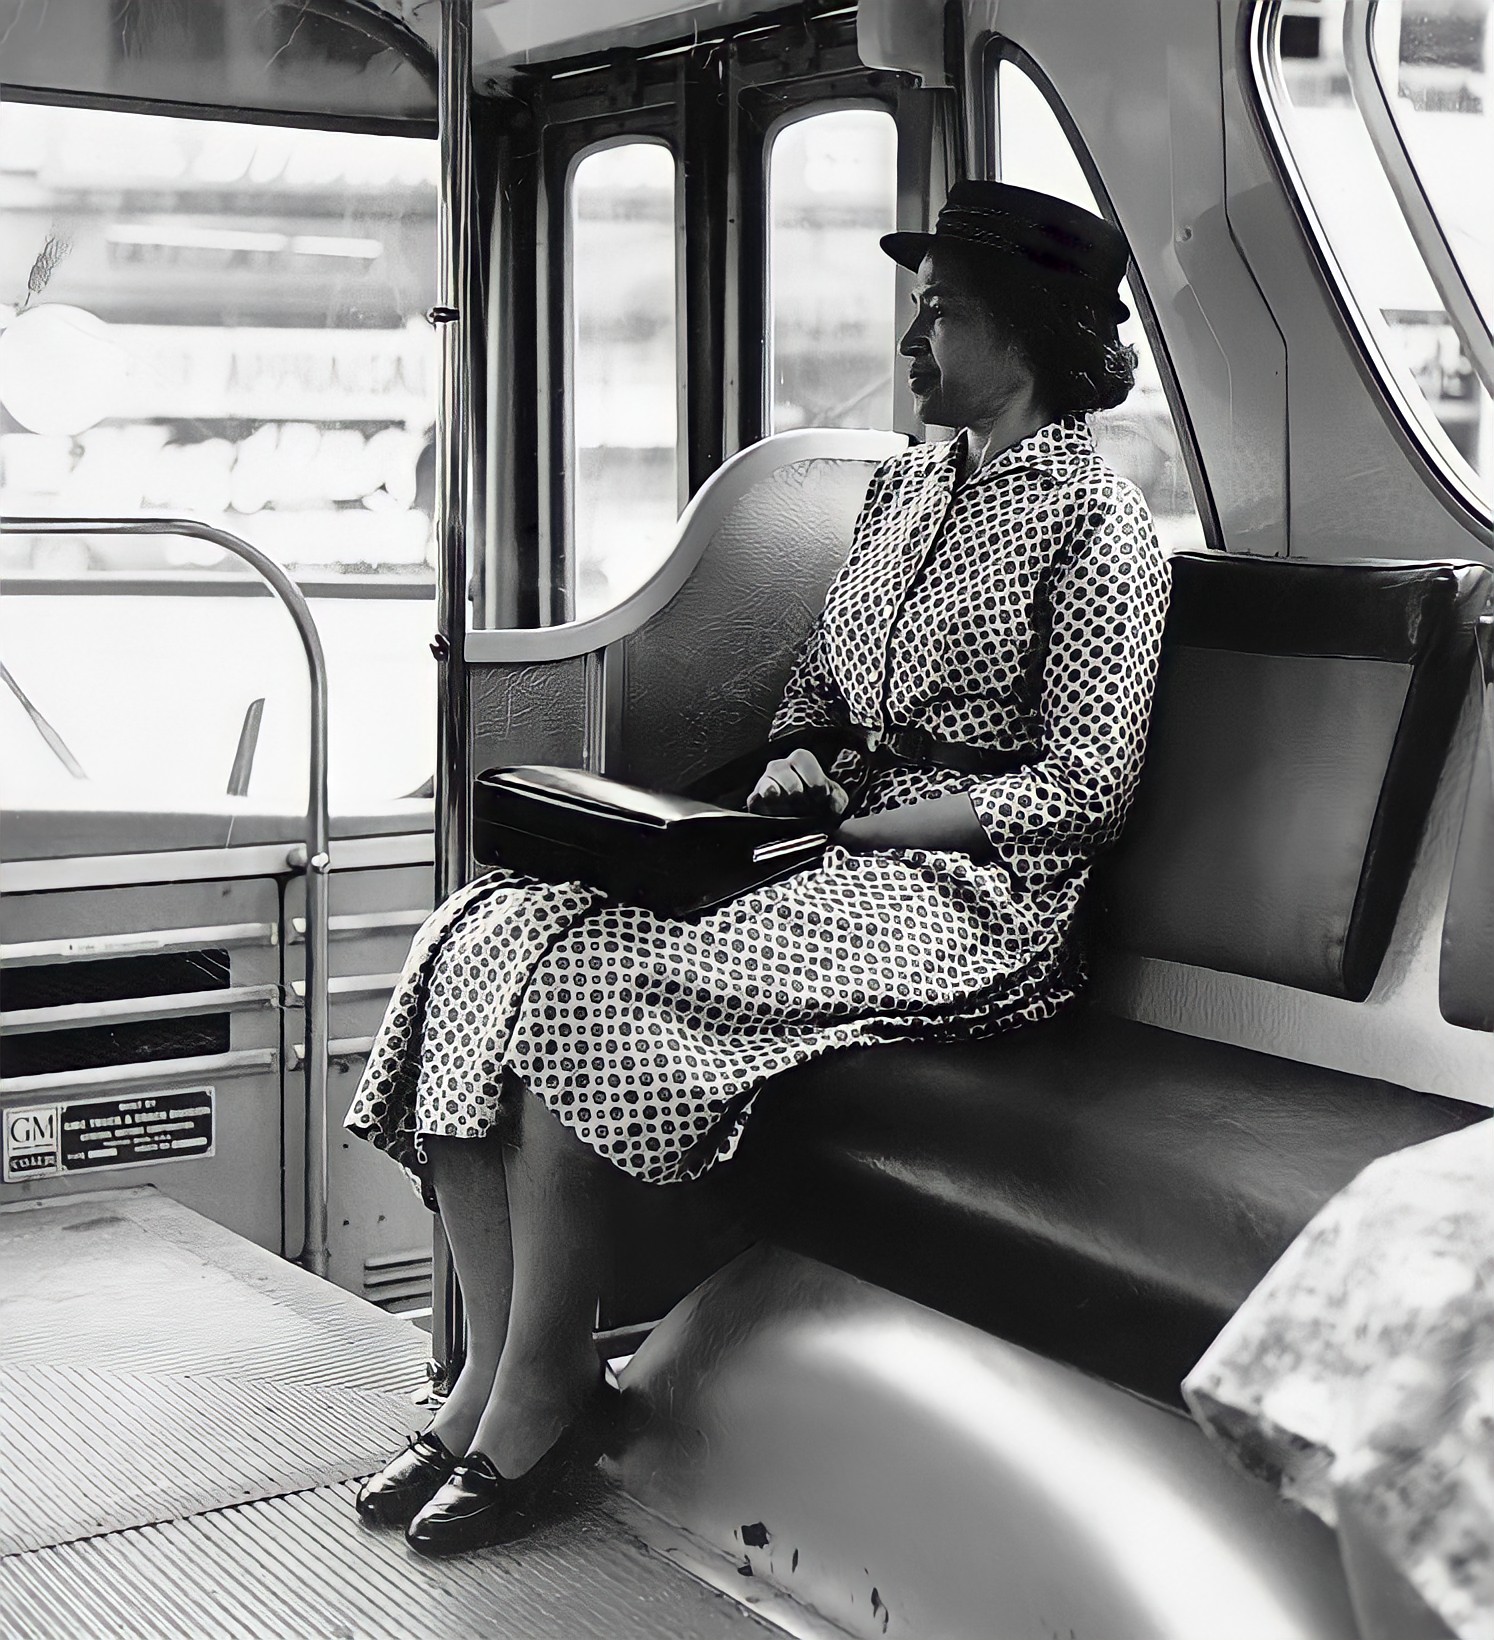 rosa parks biography video